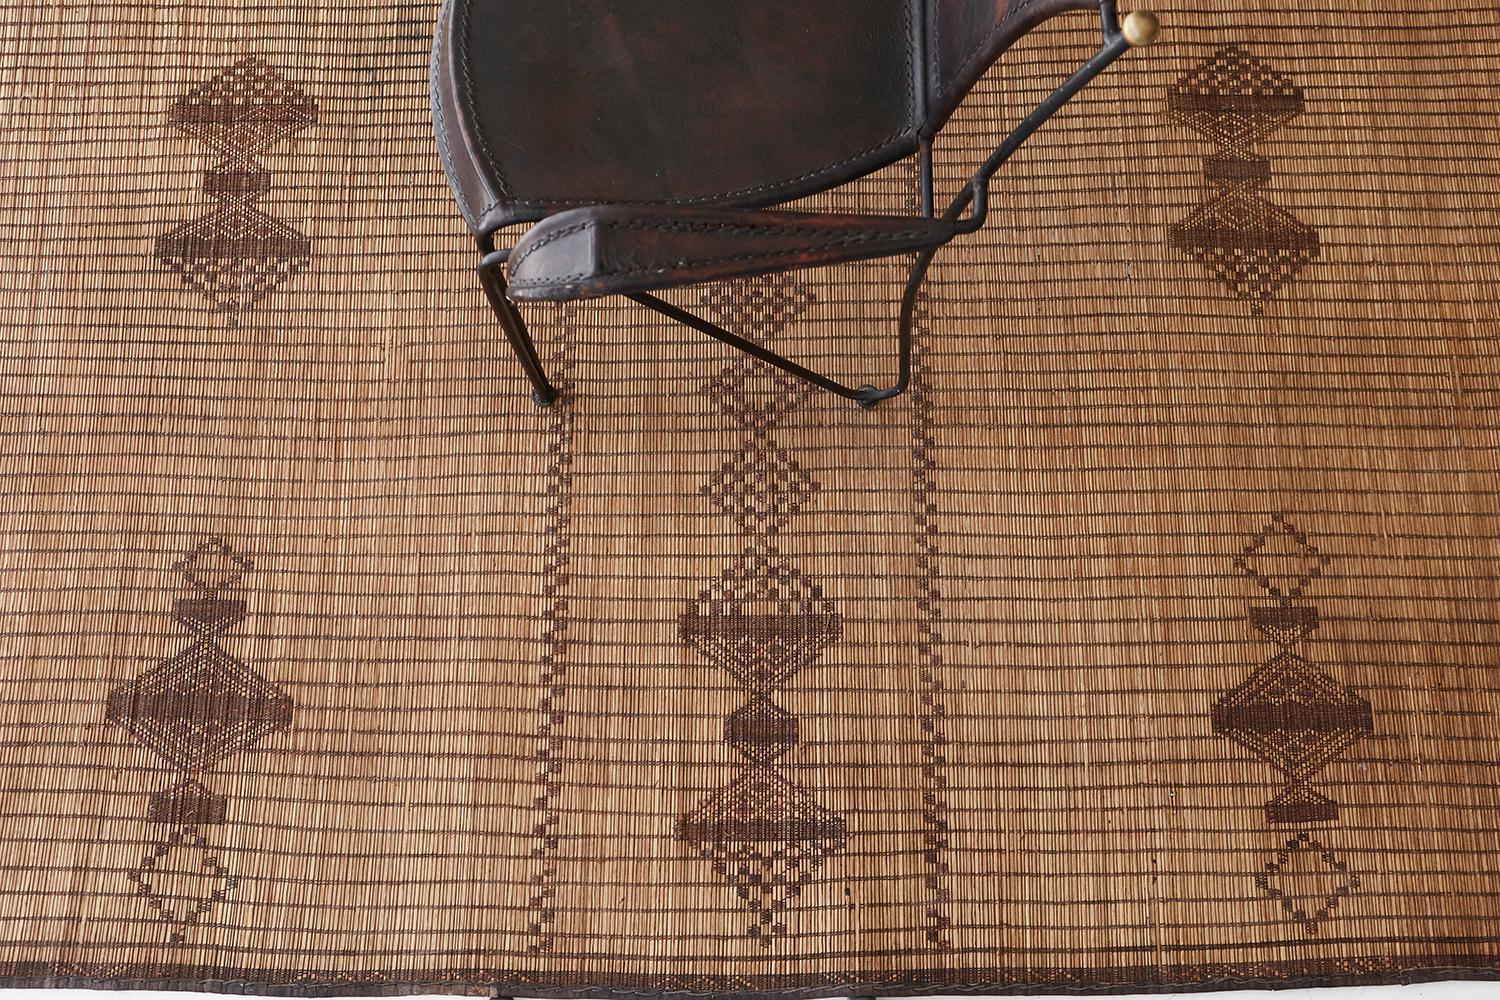 Rich in culture is intricately handwoven with reed and leather. Tuareg mats are a must-have on your collections that the Berber symbols together with the diamond patterns are incredibly ensembled. It provides satisfaction to the eyes of everyone and